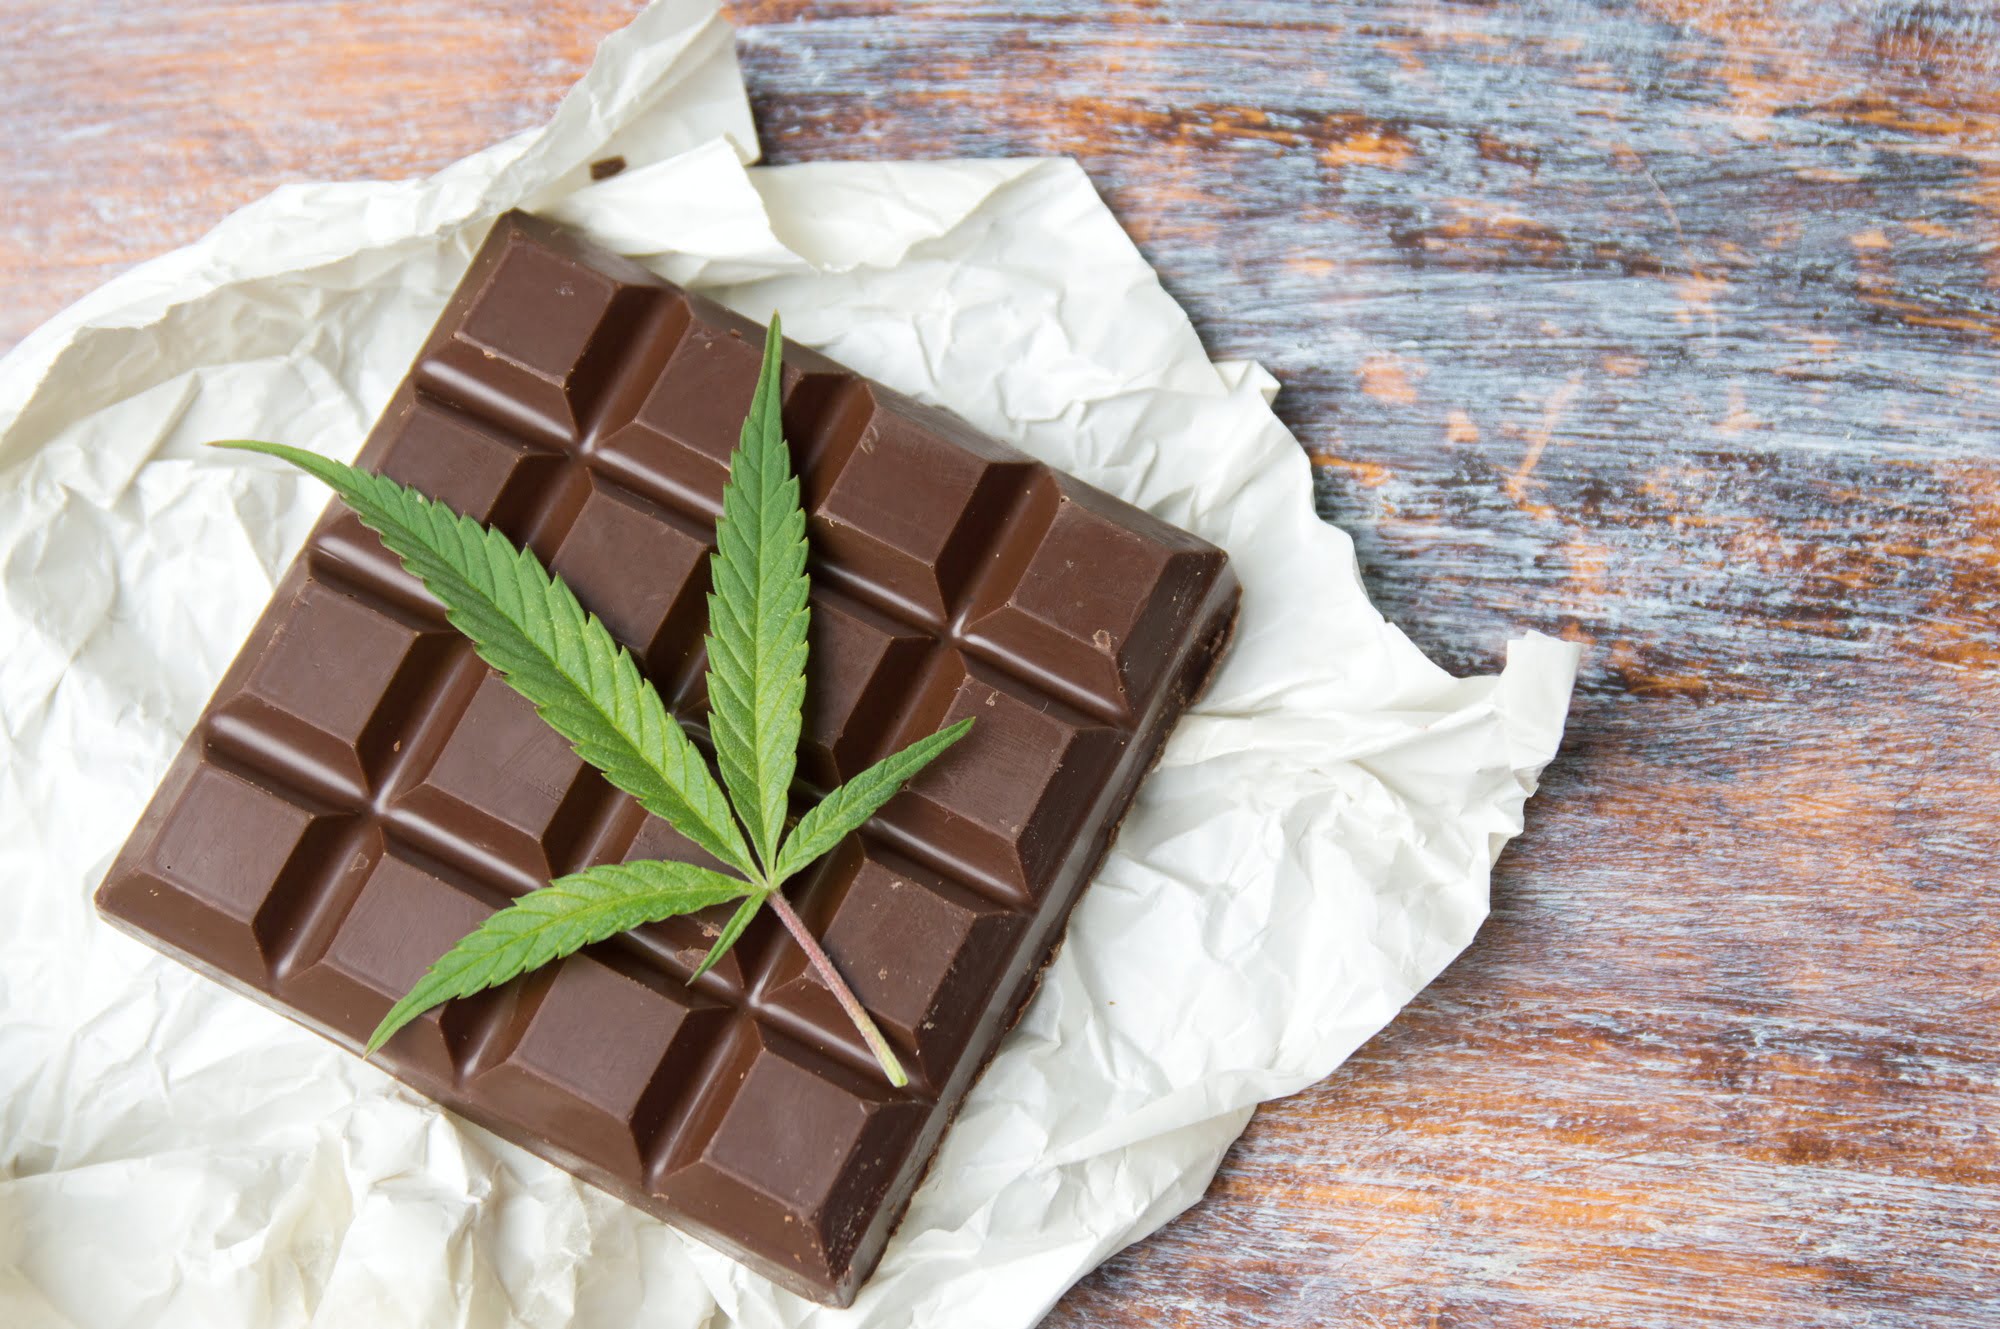 Are you interested in trying out cannabis edibles for the first time? This is what you need to know about the benefits, dosage, and more.